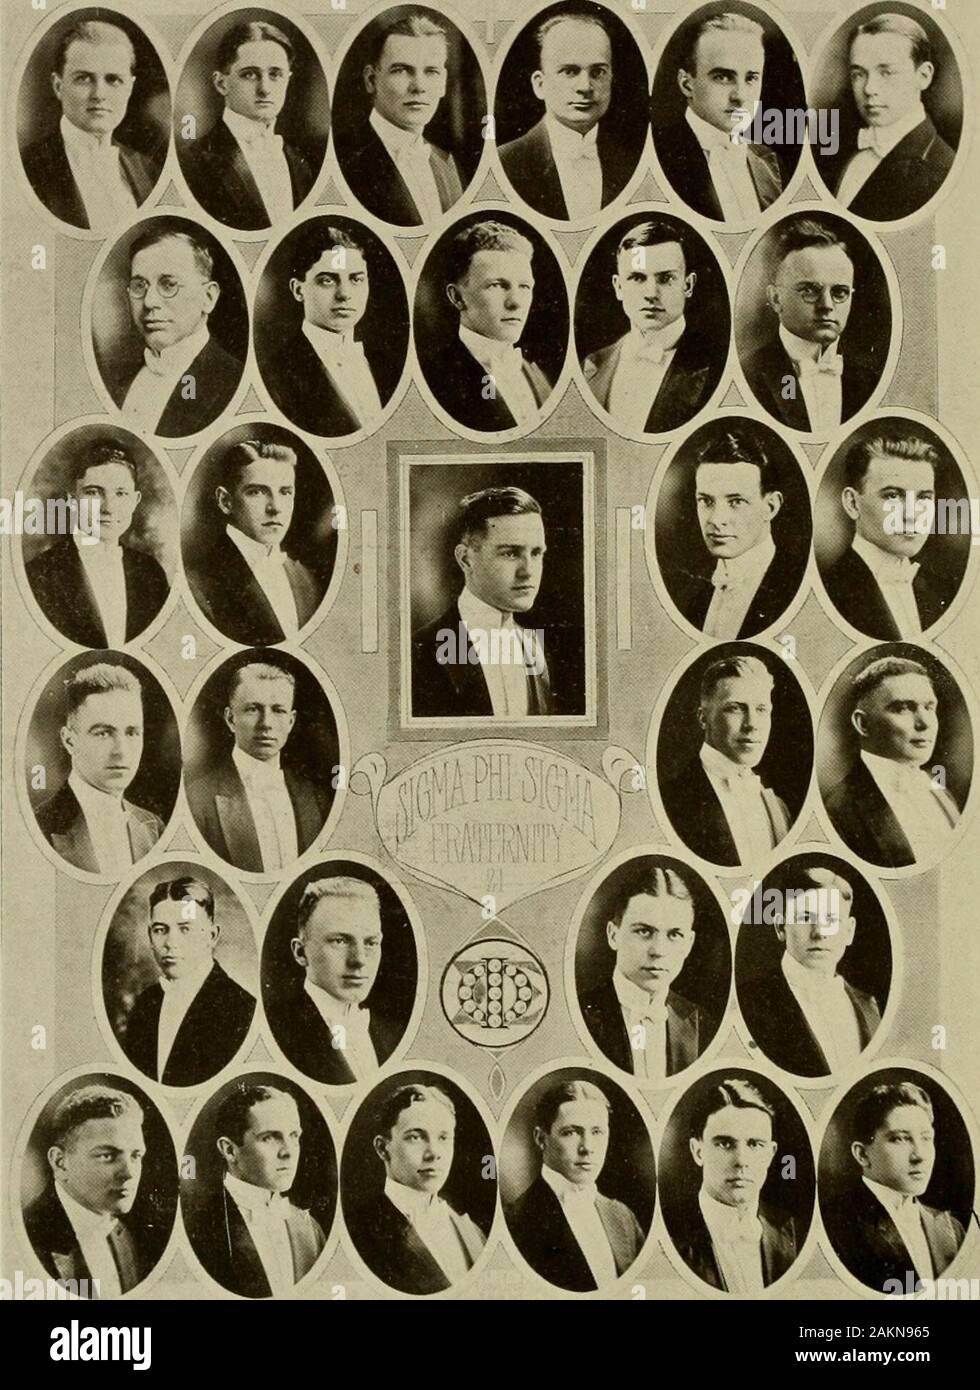 Terra Mariae . Sigma jNJu Founded at the Virginia Military Institute in 1869Delta Phi Chapter Established in 1917 COLORS FLOWER Black, AVhite, Gold White Rose PUBLICATIONThe Delta FRATRES IN FACULTATEProfessor T. H. Spence FRATRES IN URBEV. B. Bomberger E. C. Towles S. E. Day H. R. Walls J. E. Palmer FRATRES IN UNIVERSITATEClass of Nineteen Tzveiity-oiic A. C. DiggsL. M. GoodwinH. R. Peddicord W. C. JesterA. McDonaldT. Sullivan Class of Xineteen Ti^eiify-tzvoM. M. Clark H. V. Keene A. D. Kemp Class of Xineteen Ti^cnty-tlirec J. E. Burroughs J. M. Lescure G. G. Bucheister W. J. Lescure C. I£. C Stock Photo